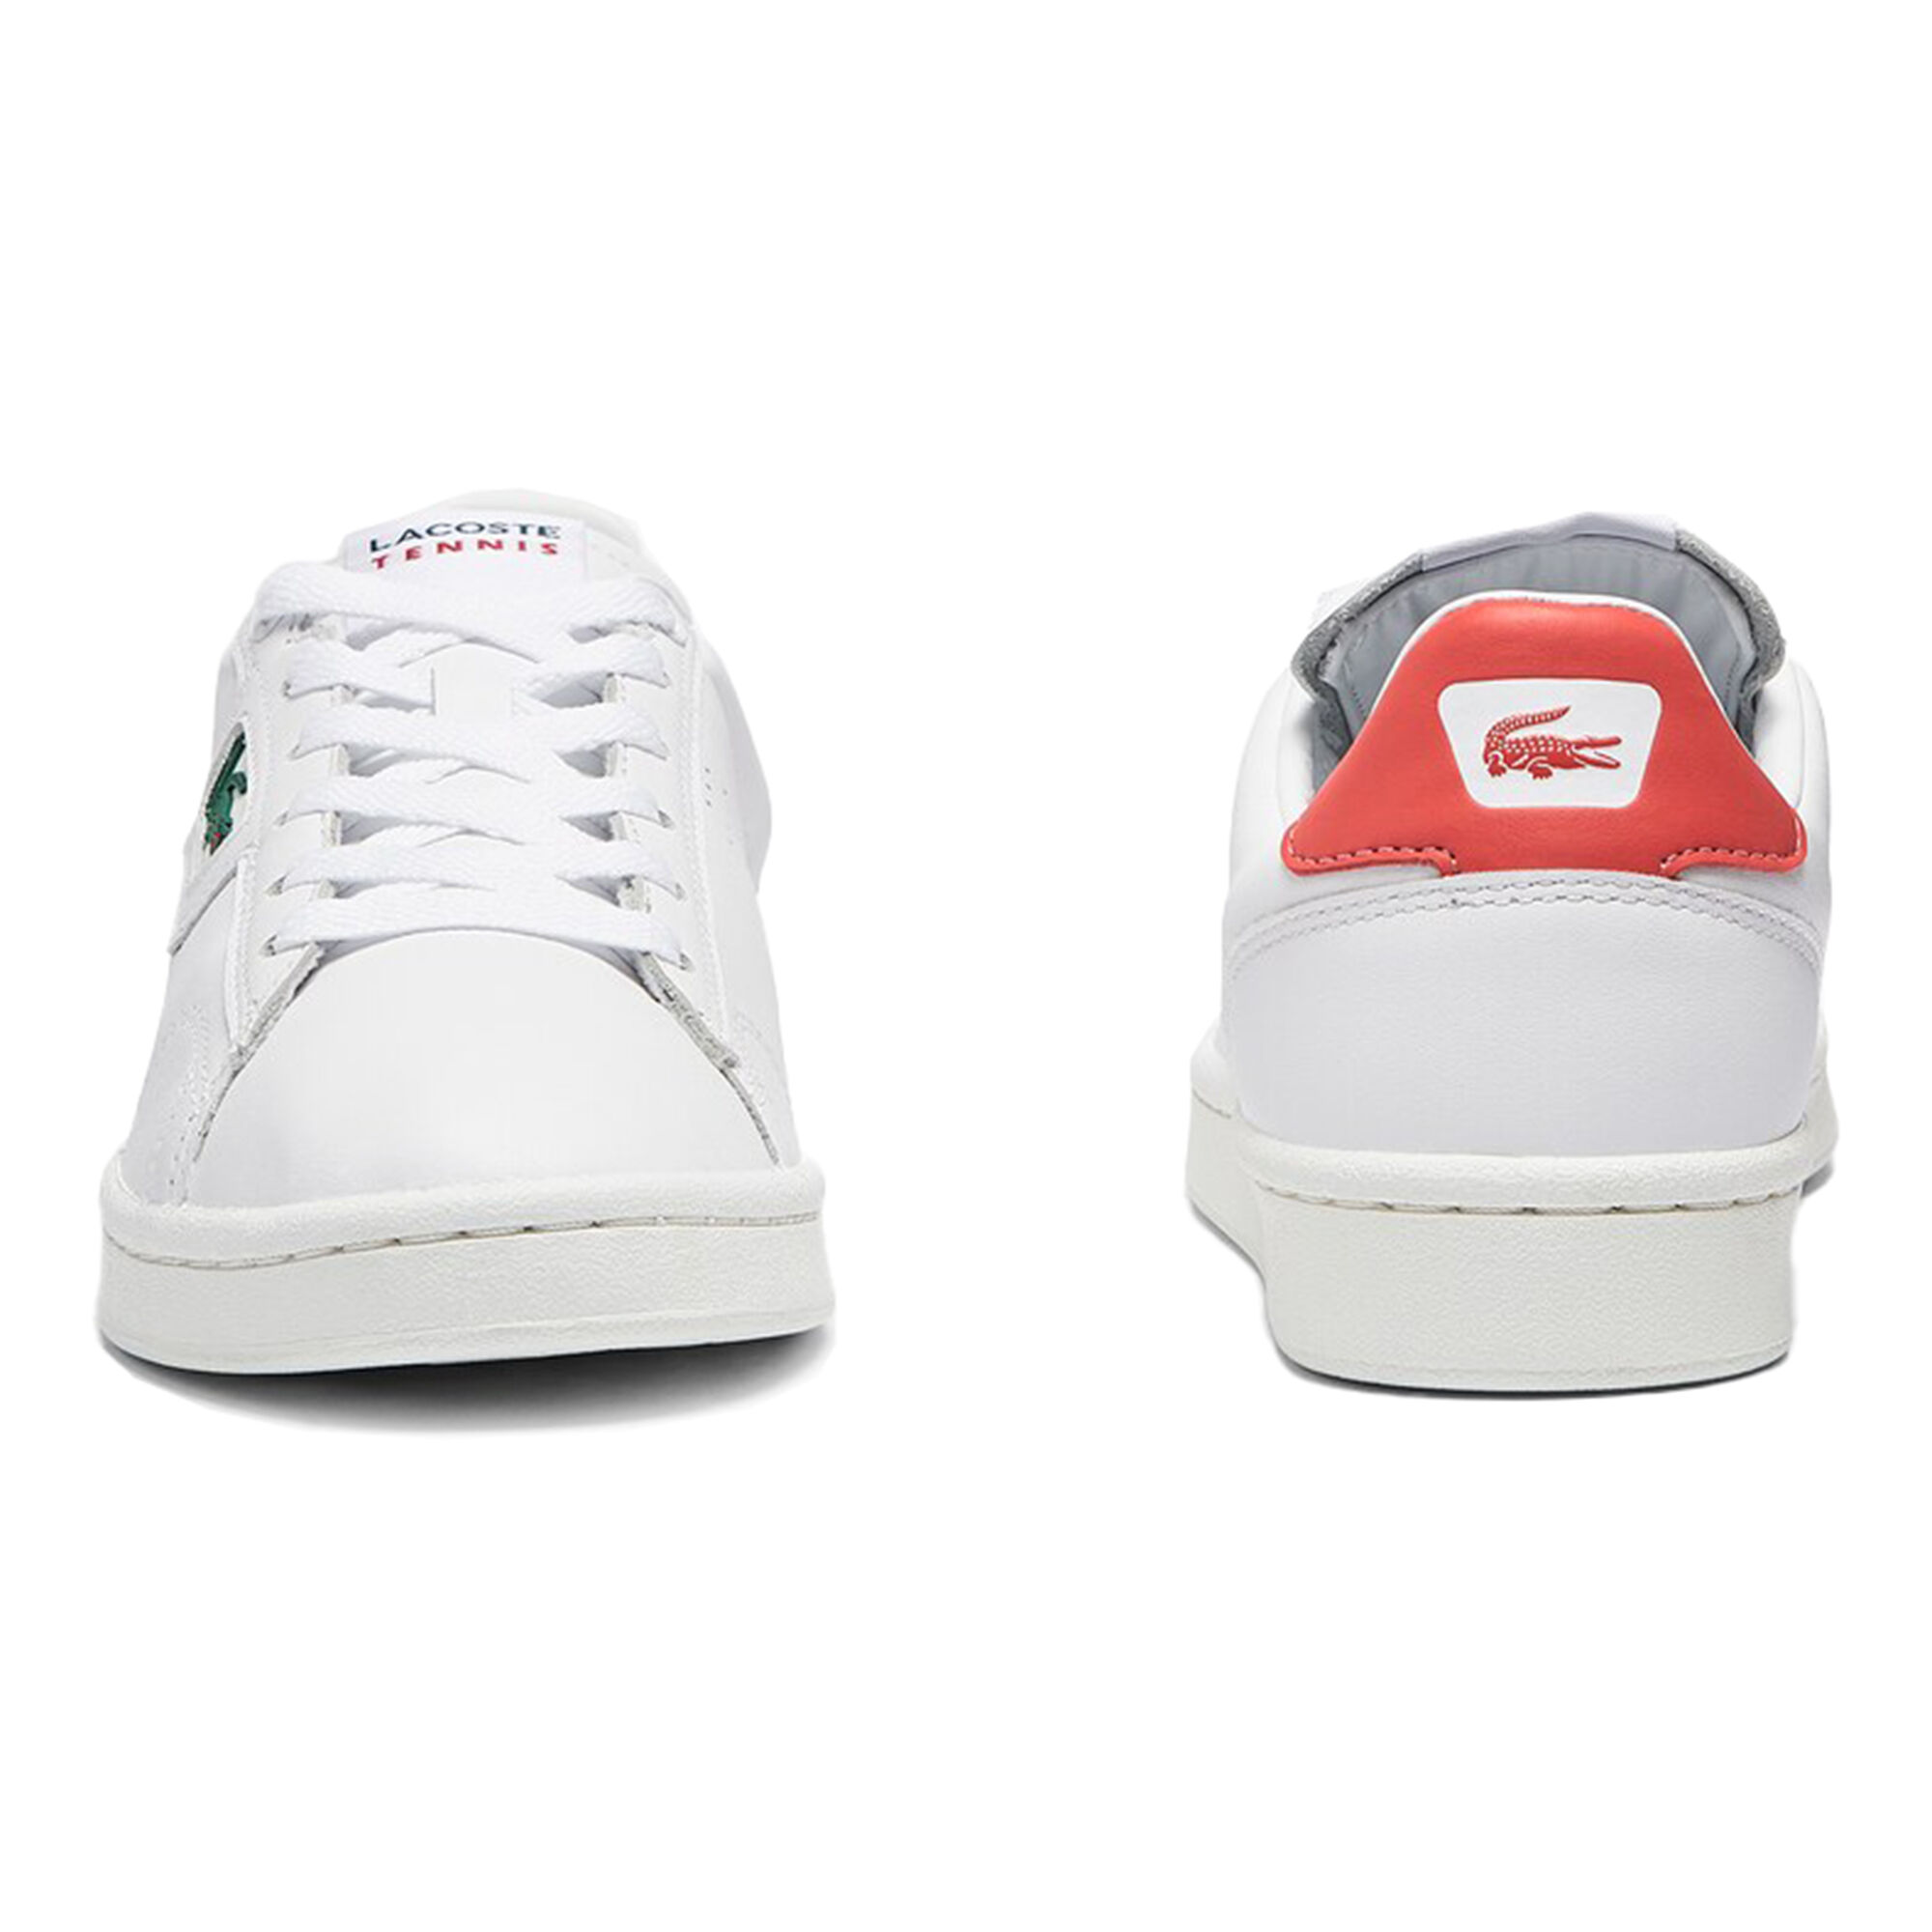 Buy Lacoste Master Classic Sneakers Women White, Coral online | Tennis ...